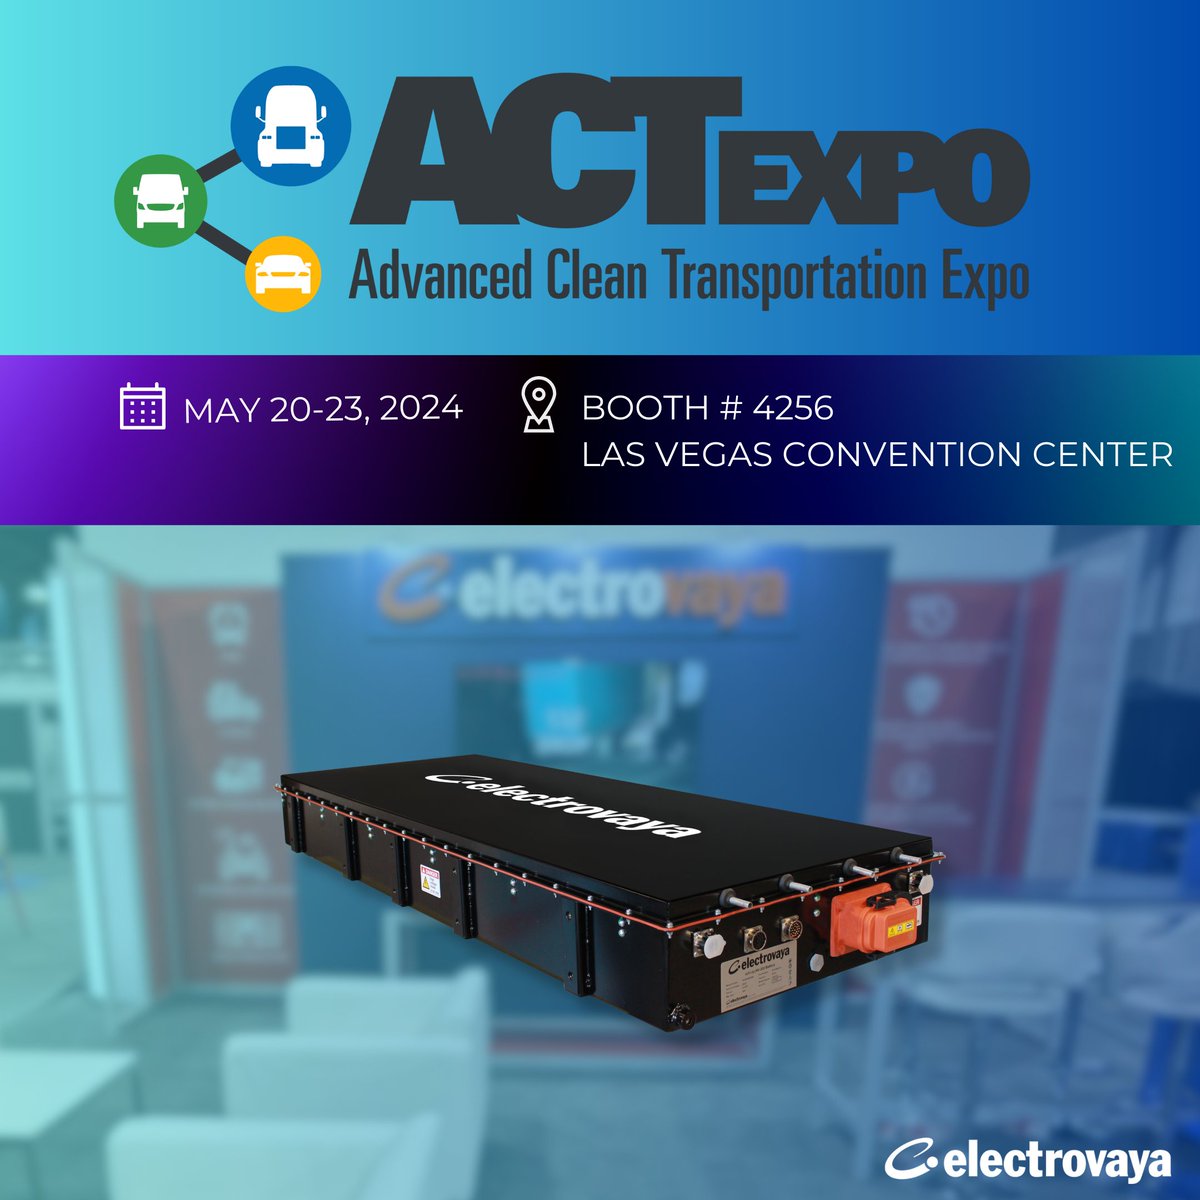 🚀 Attention🚀 The countdown to #ACTexpo 2024 has officially begun! 📅Stay tuned for updates as we gear up for this transformative event!

📅 May 20-23, 2024
📍 Booth 4256 / Las Vegas Convention Center

#cleanenergy #emobility #litiumionbattery